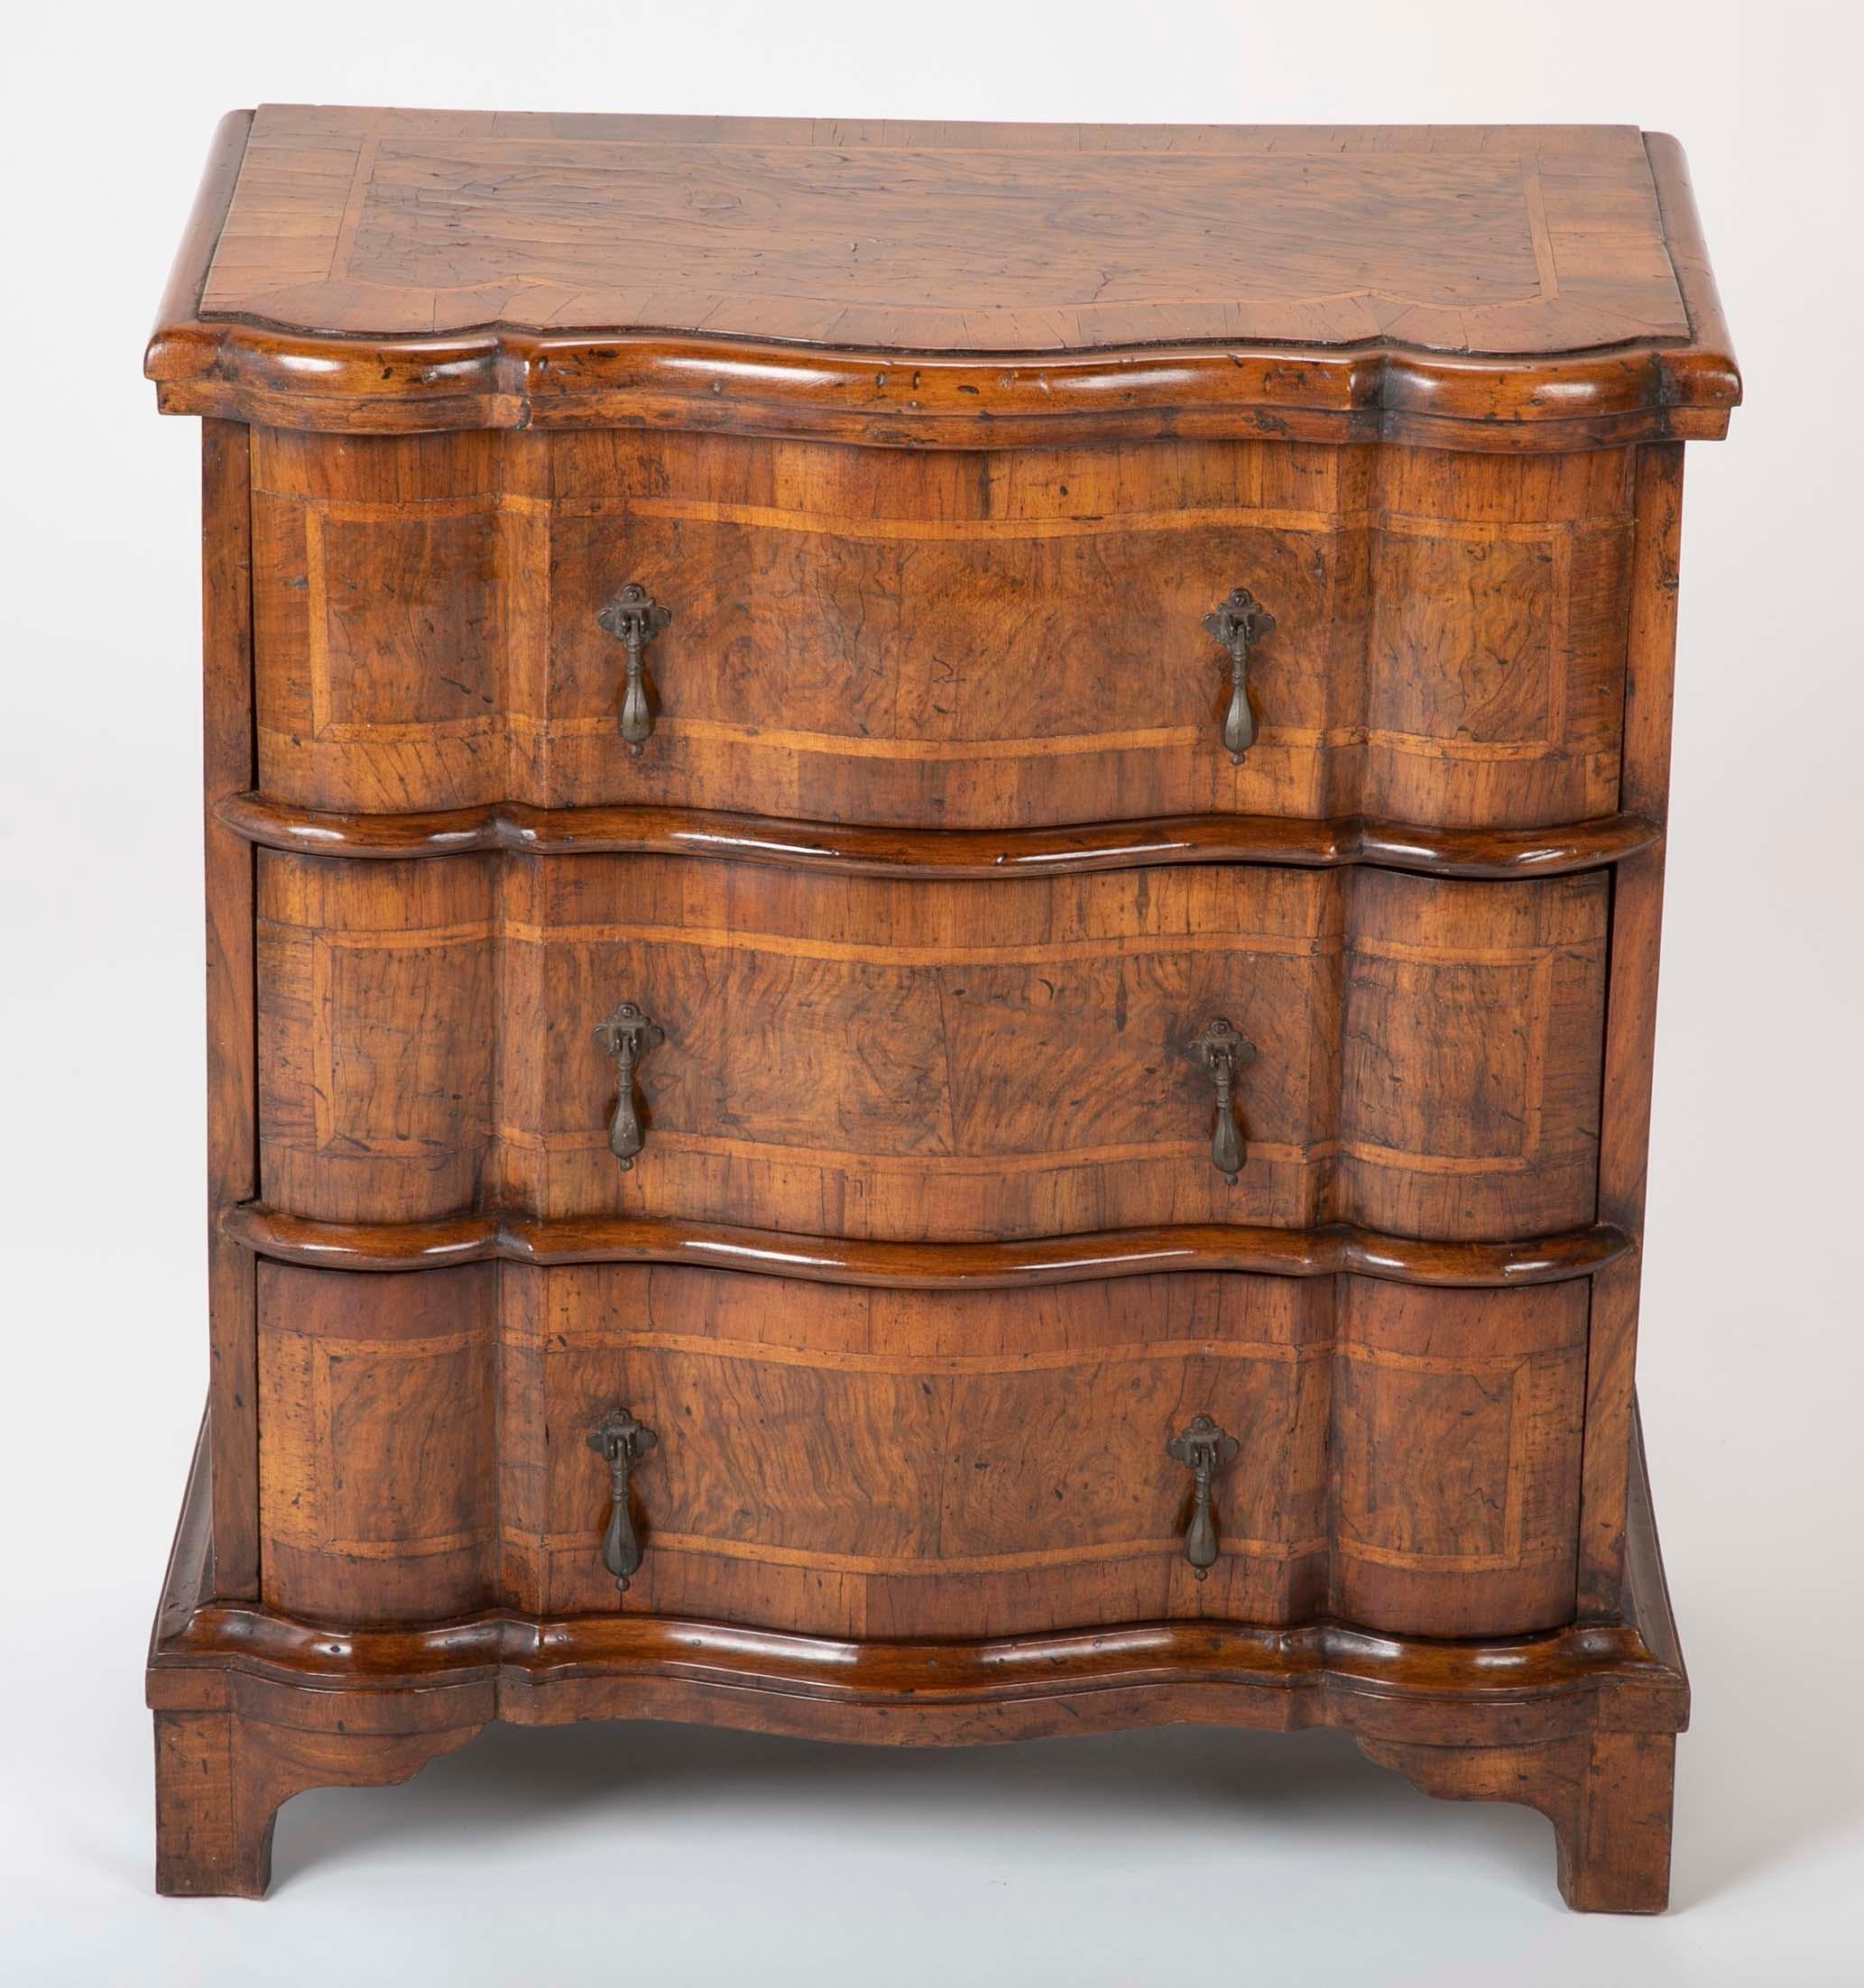 A great looking small scale Italian Baroque style three-drawer commode with burl walnut veneer and fruit wood inlay. The serpentine drawer fronts giving this piece a sexy look, with teardrop bronze pulls. The interior retaining the original paper